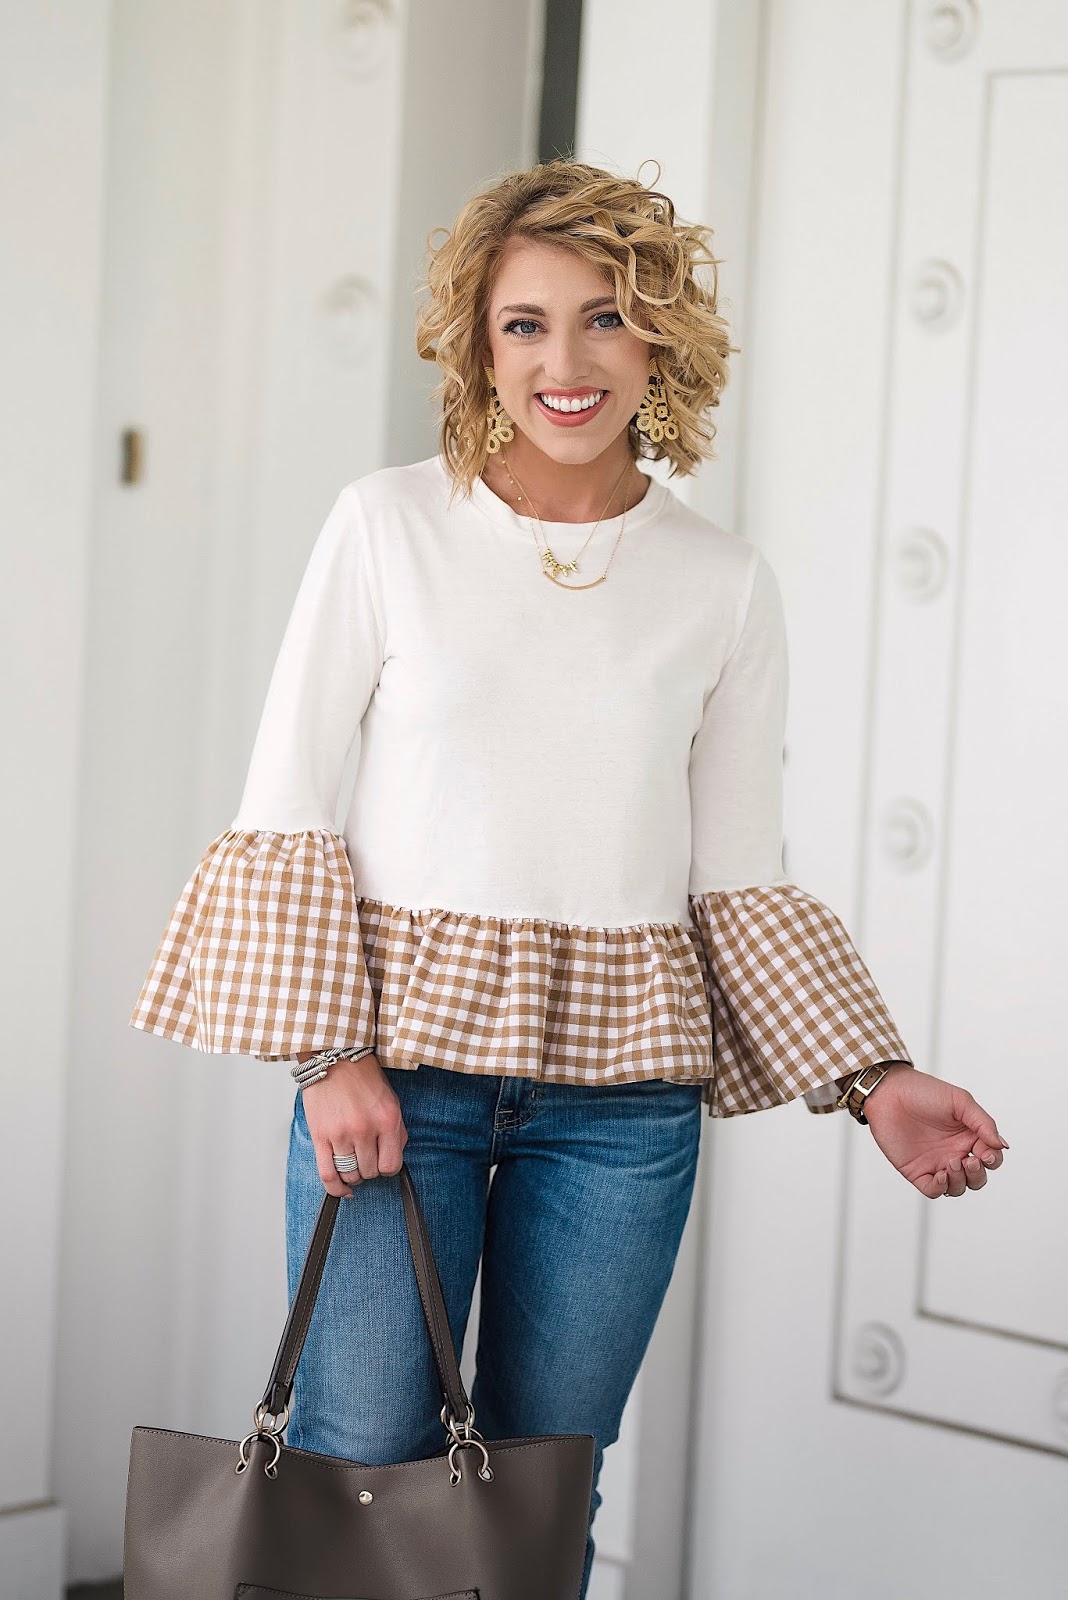 How To Add A Feminine Flair To Boyfriend Jeans + The Cutest Gingham Ruffle Peplum Top of All Time - Something Delightful Blog @racheltimmerman #somethingdelightfulblog #racheltimmerman #femininefashion